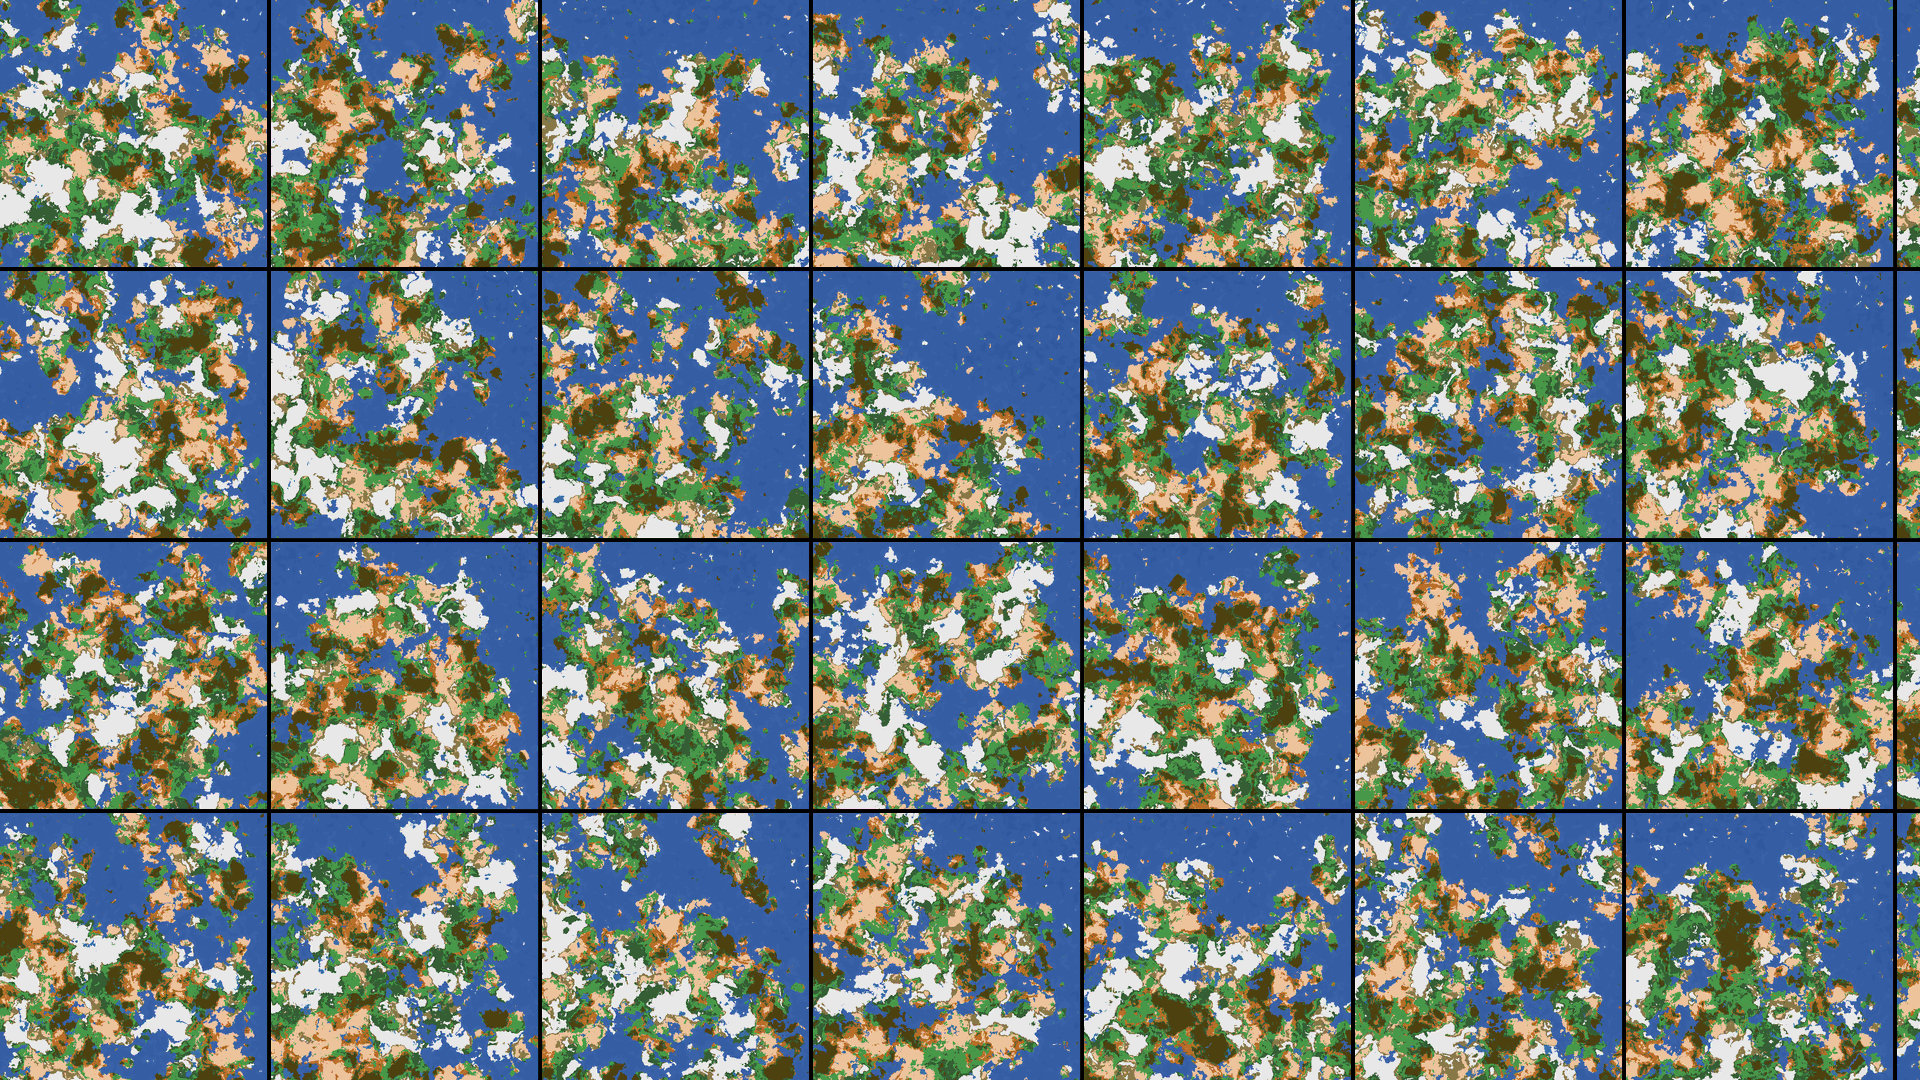 Composition of 28 overworlds, before zooming into one of them. Python powered trailer generation. 